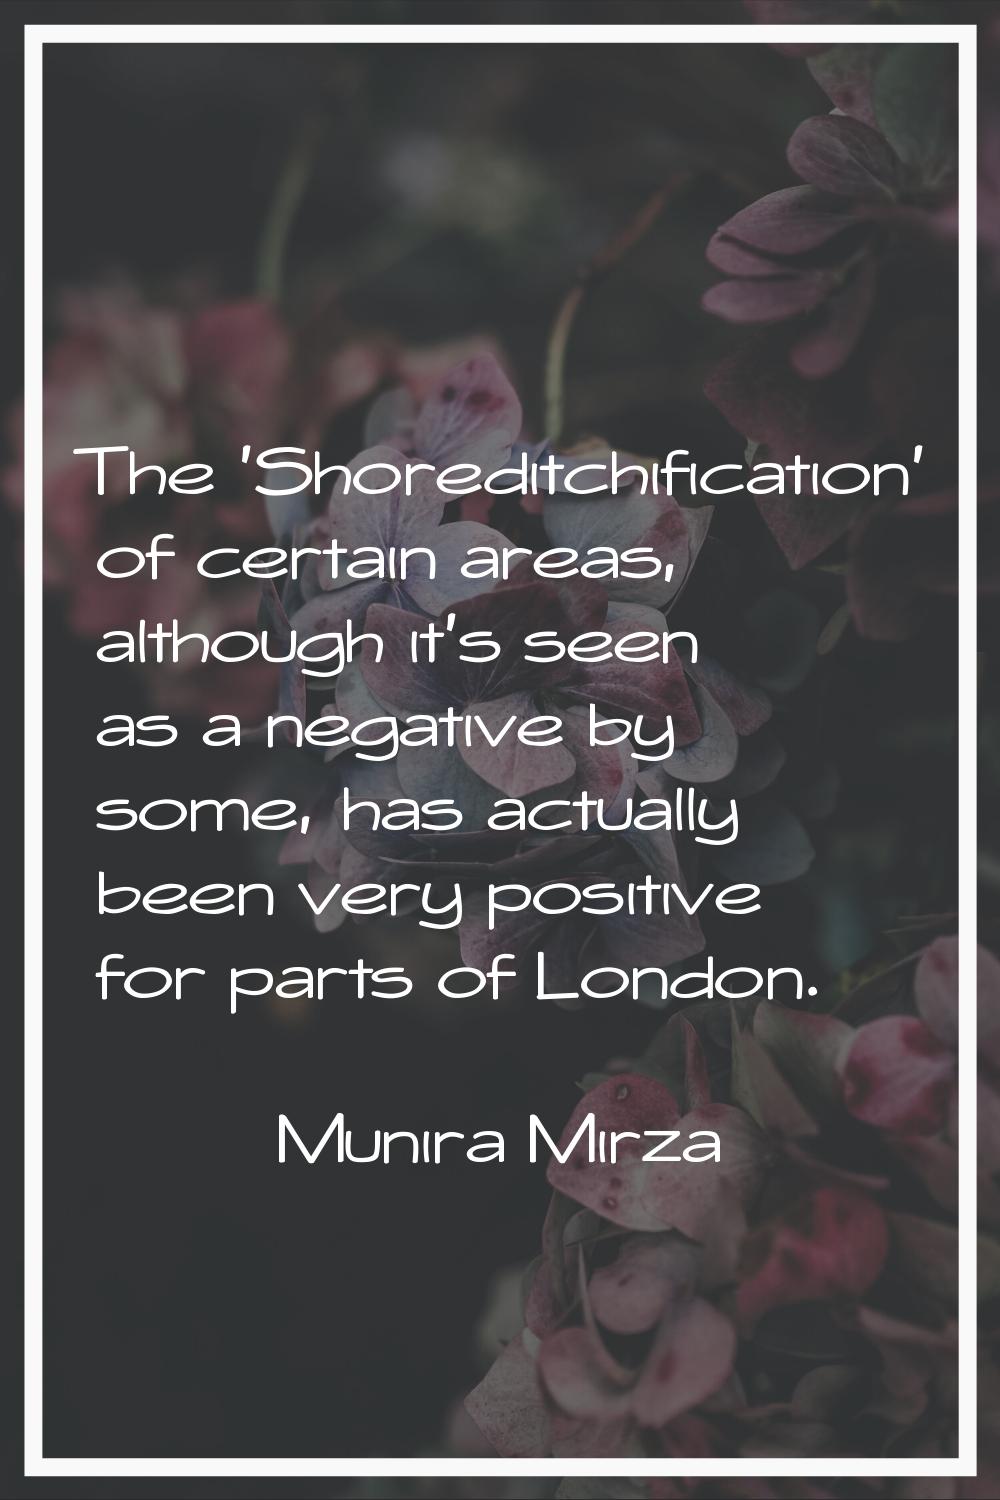 The 'Shoreditchification' of certain areas, although it's seen as a negative by some, has actually 